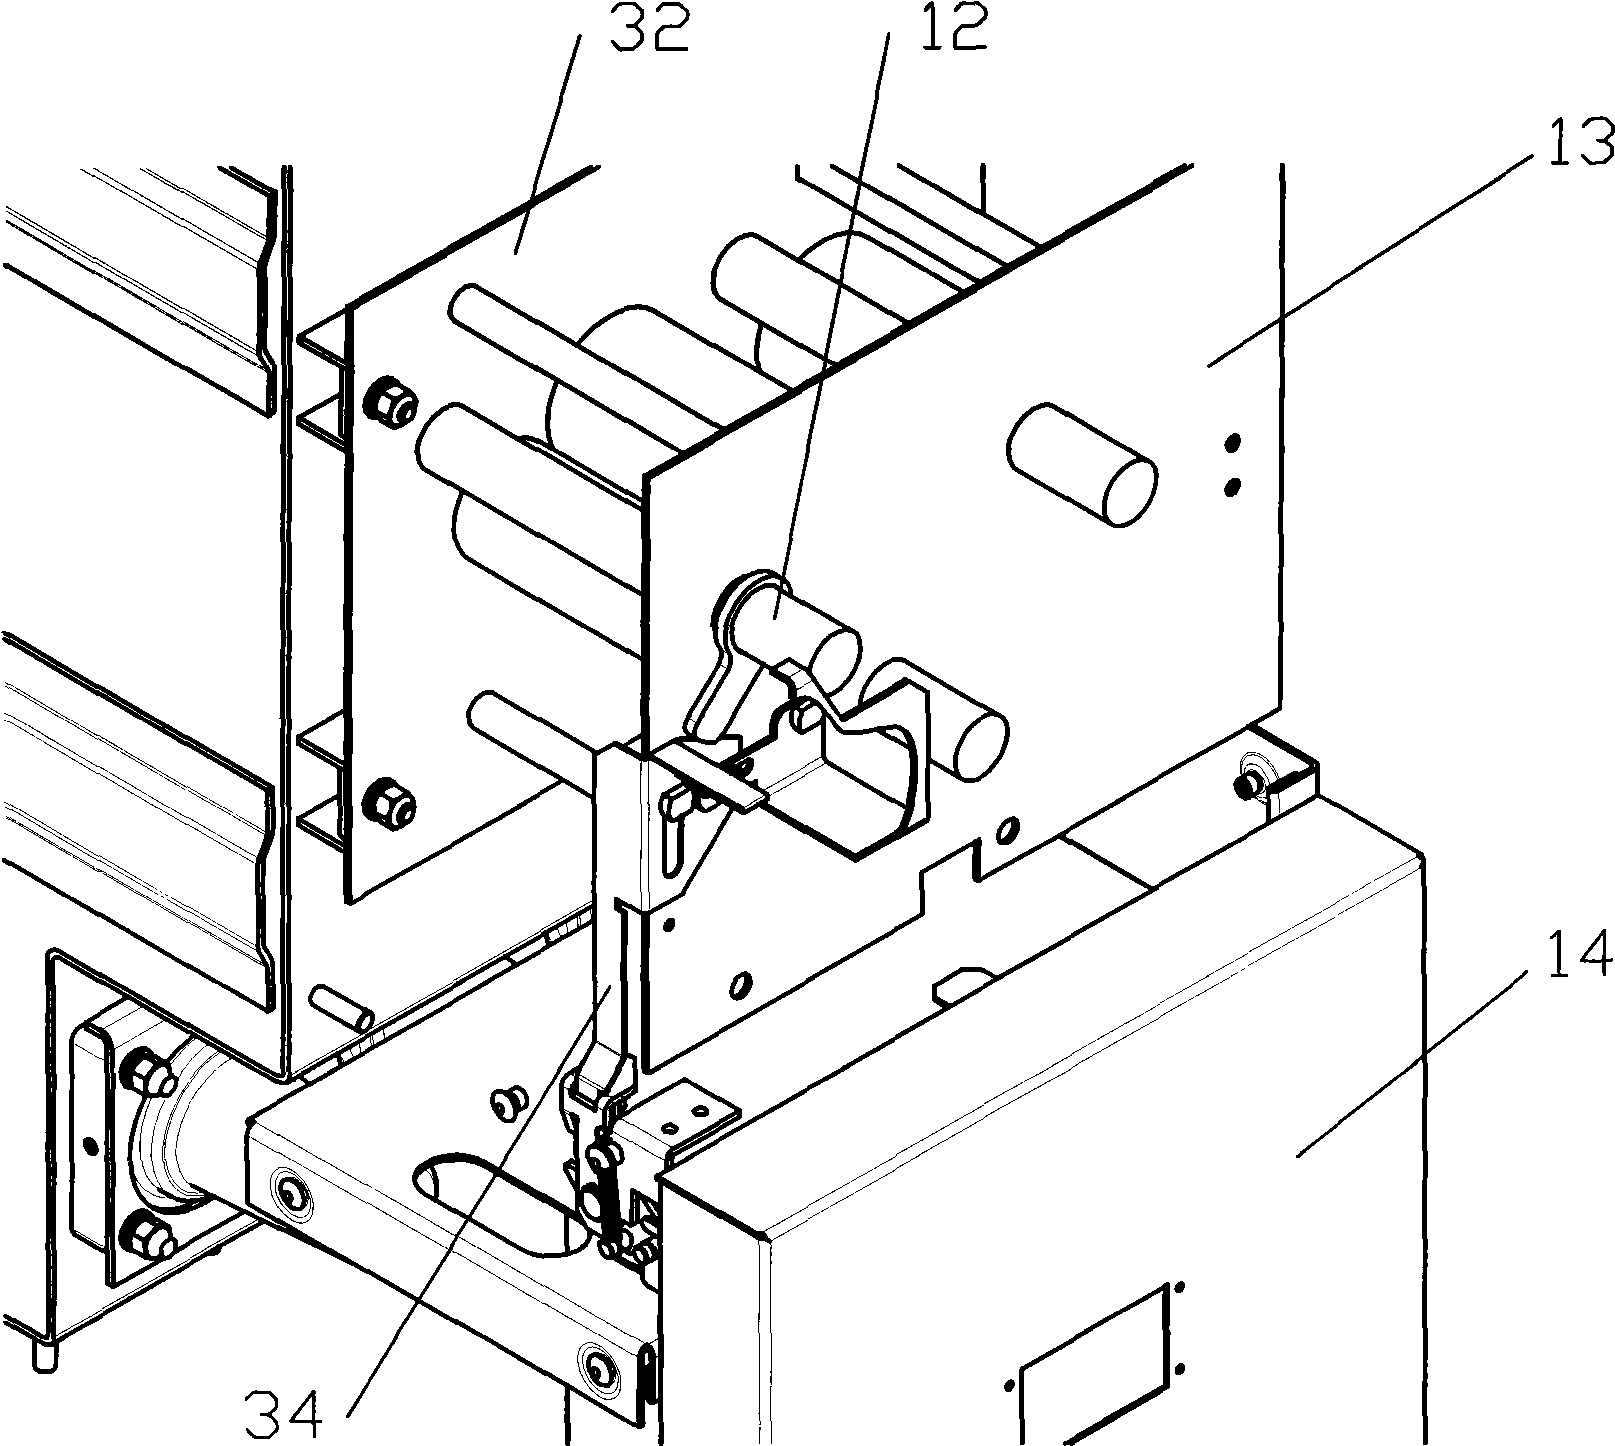 Interlocking device of metal-enclosed switchgear grounding switch and cable room door